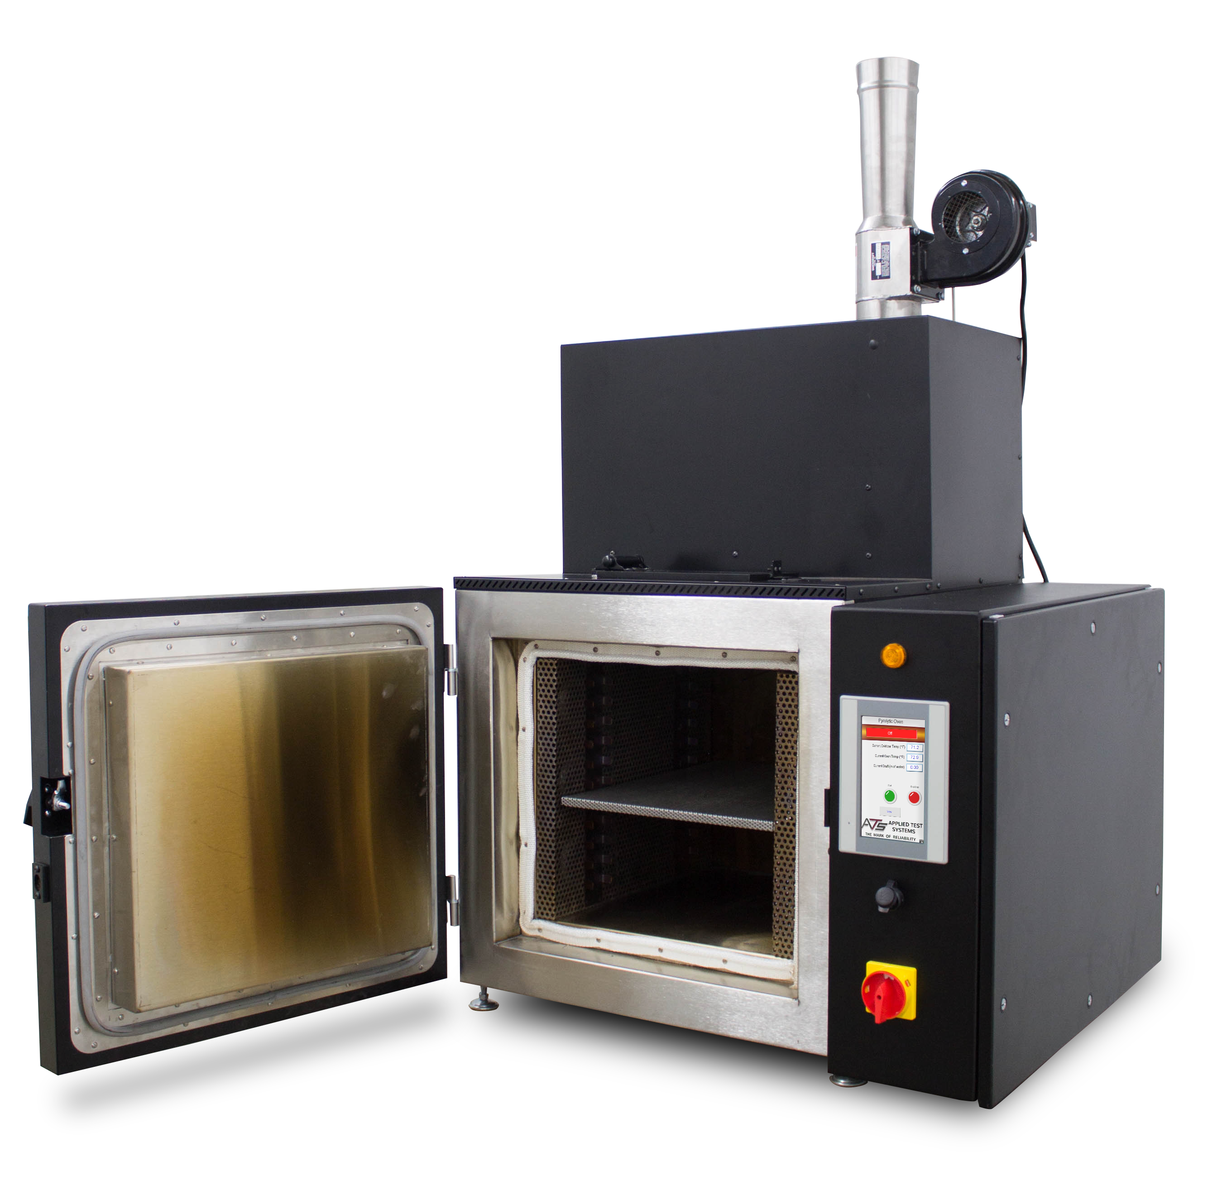 Pyro-Clean® Pyrolytic Oven